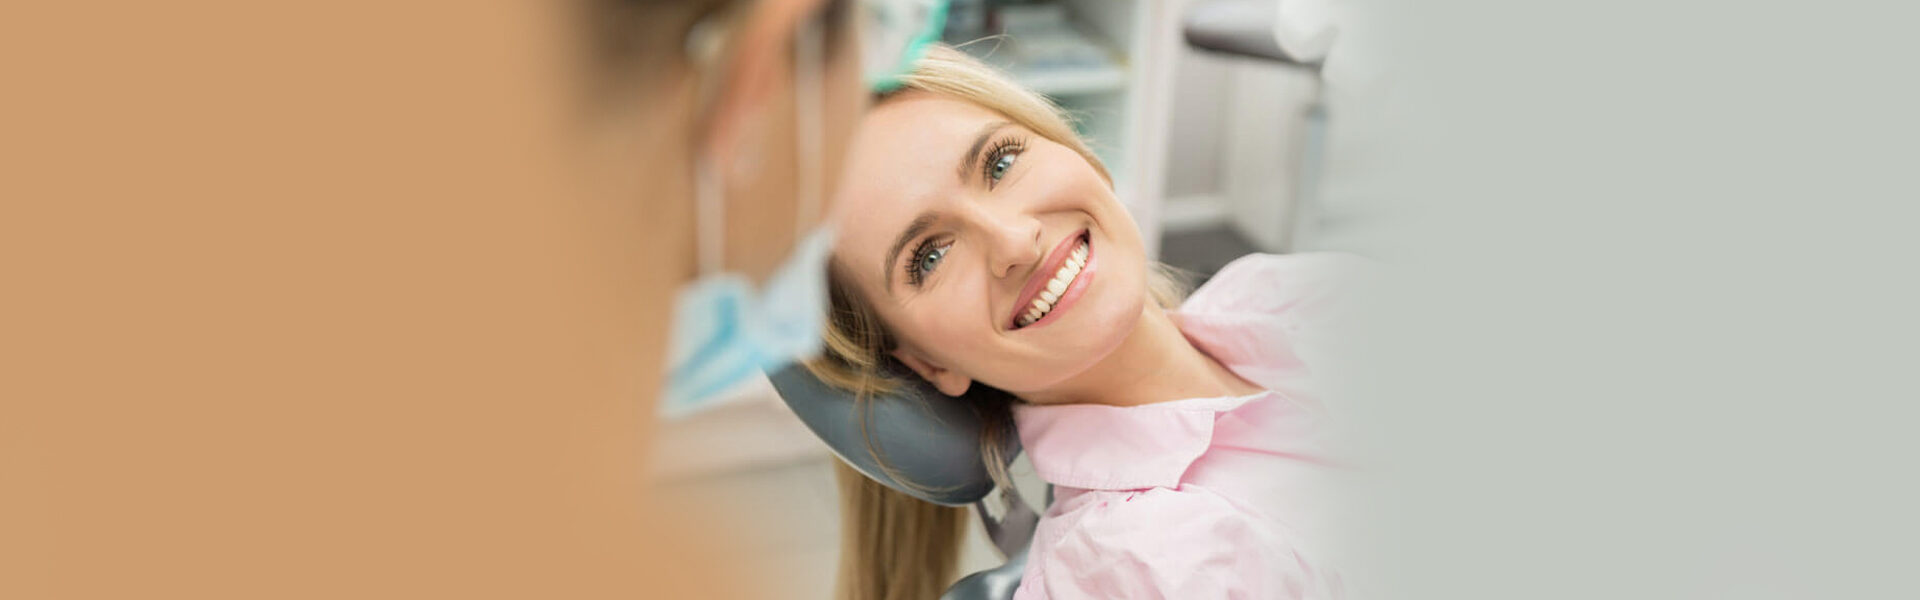 Dental Exams and Cleanings in Chandler, AZ 85224